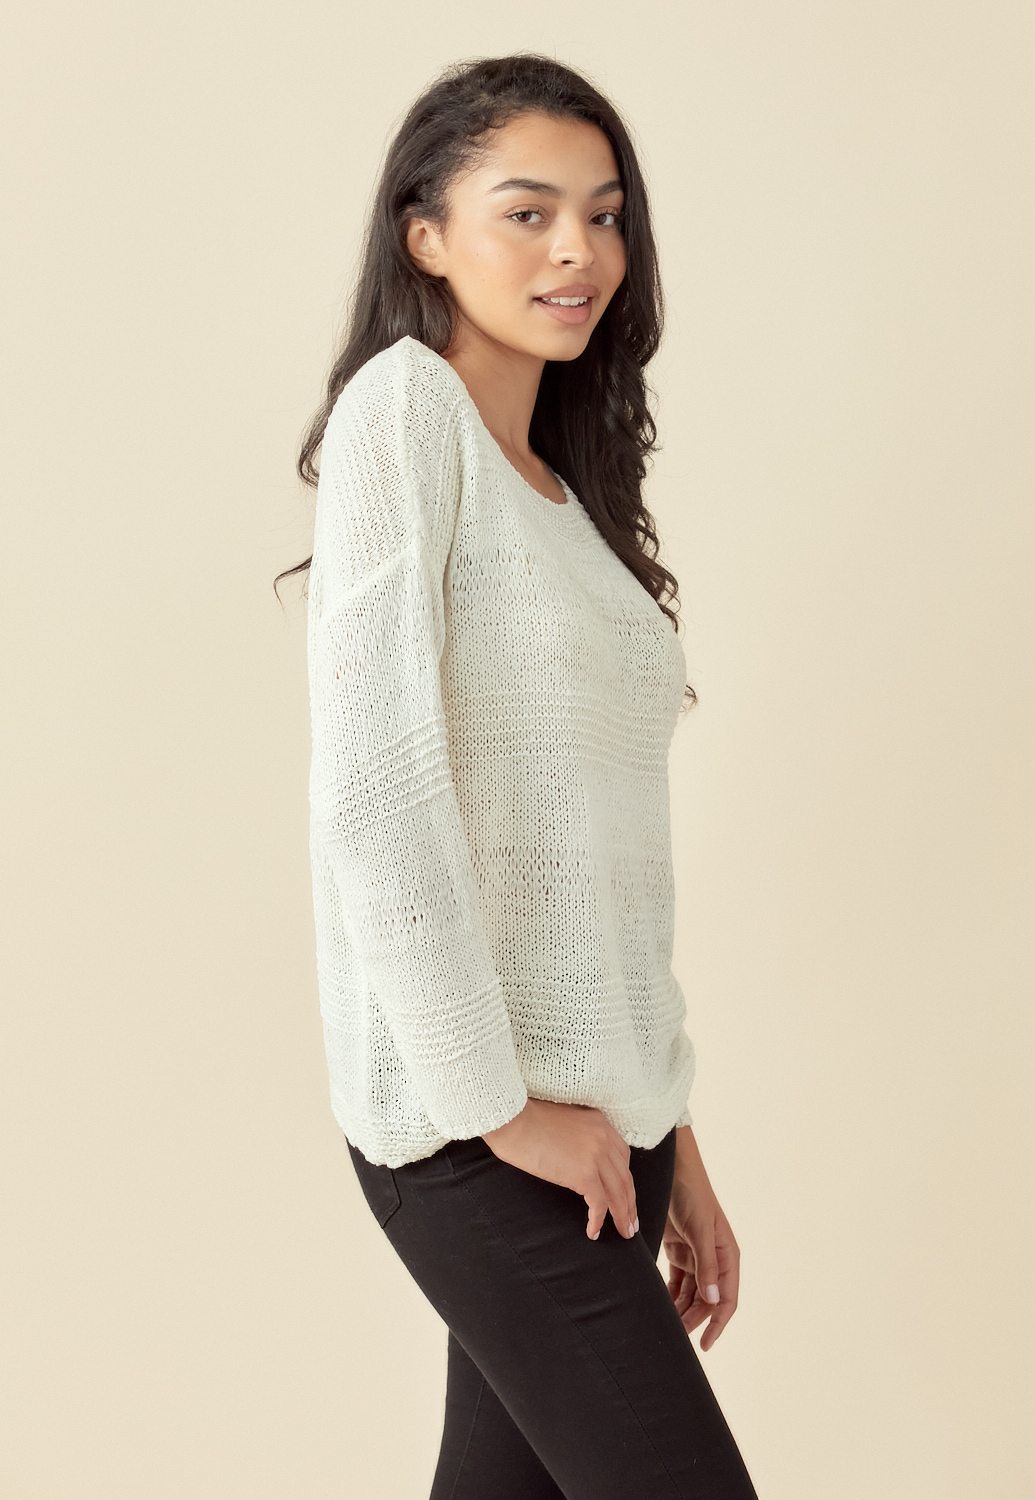 Knit Sweater Top 